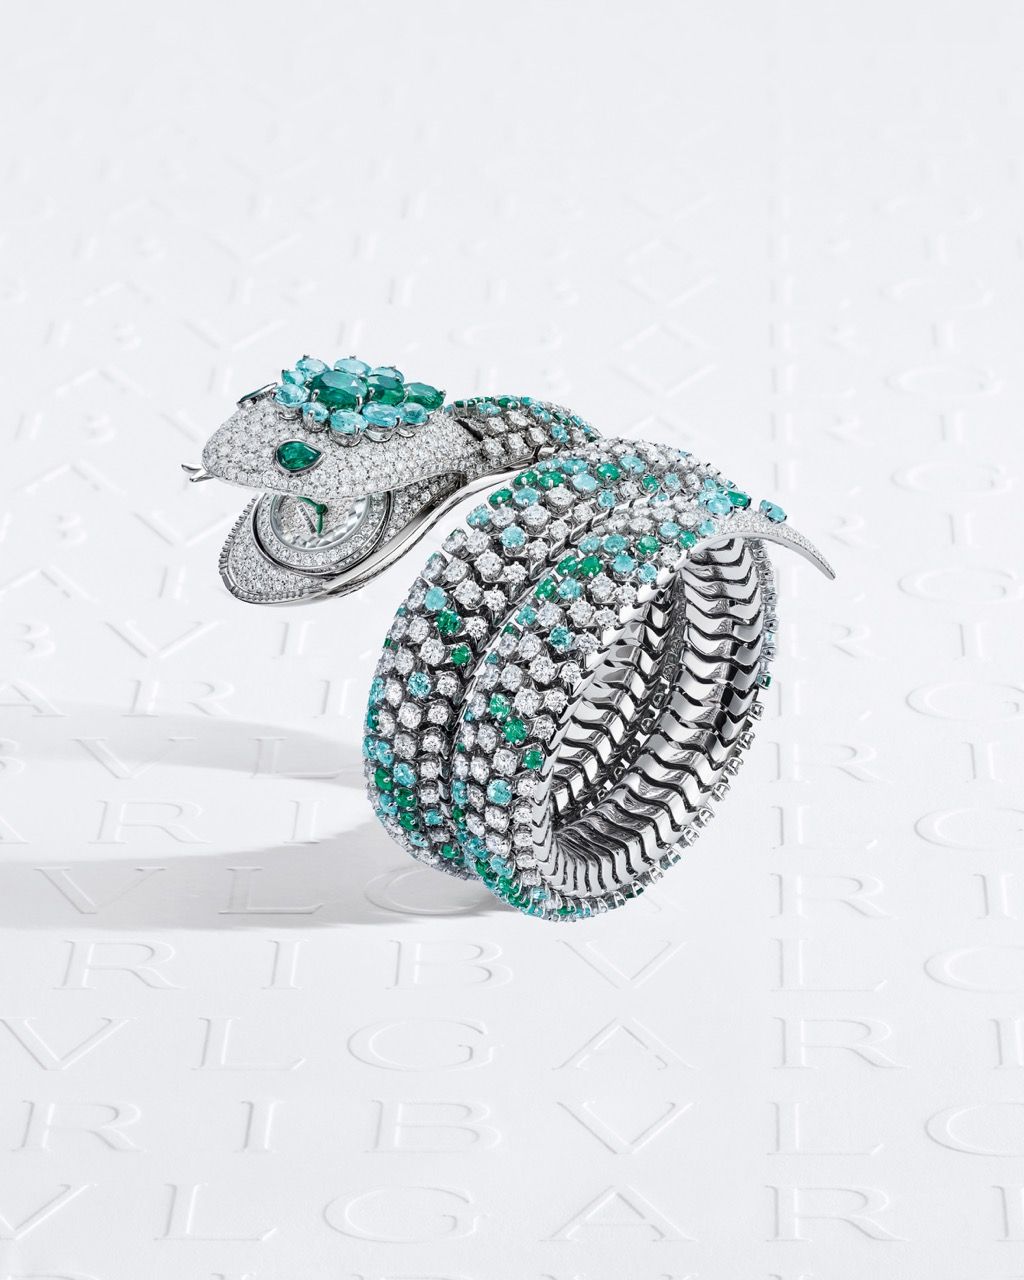 Bulgari is celebrating the 75th anniversary of the Serpenti design with two new pieces